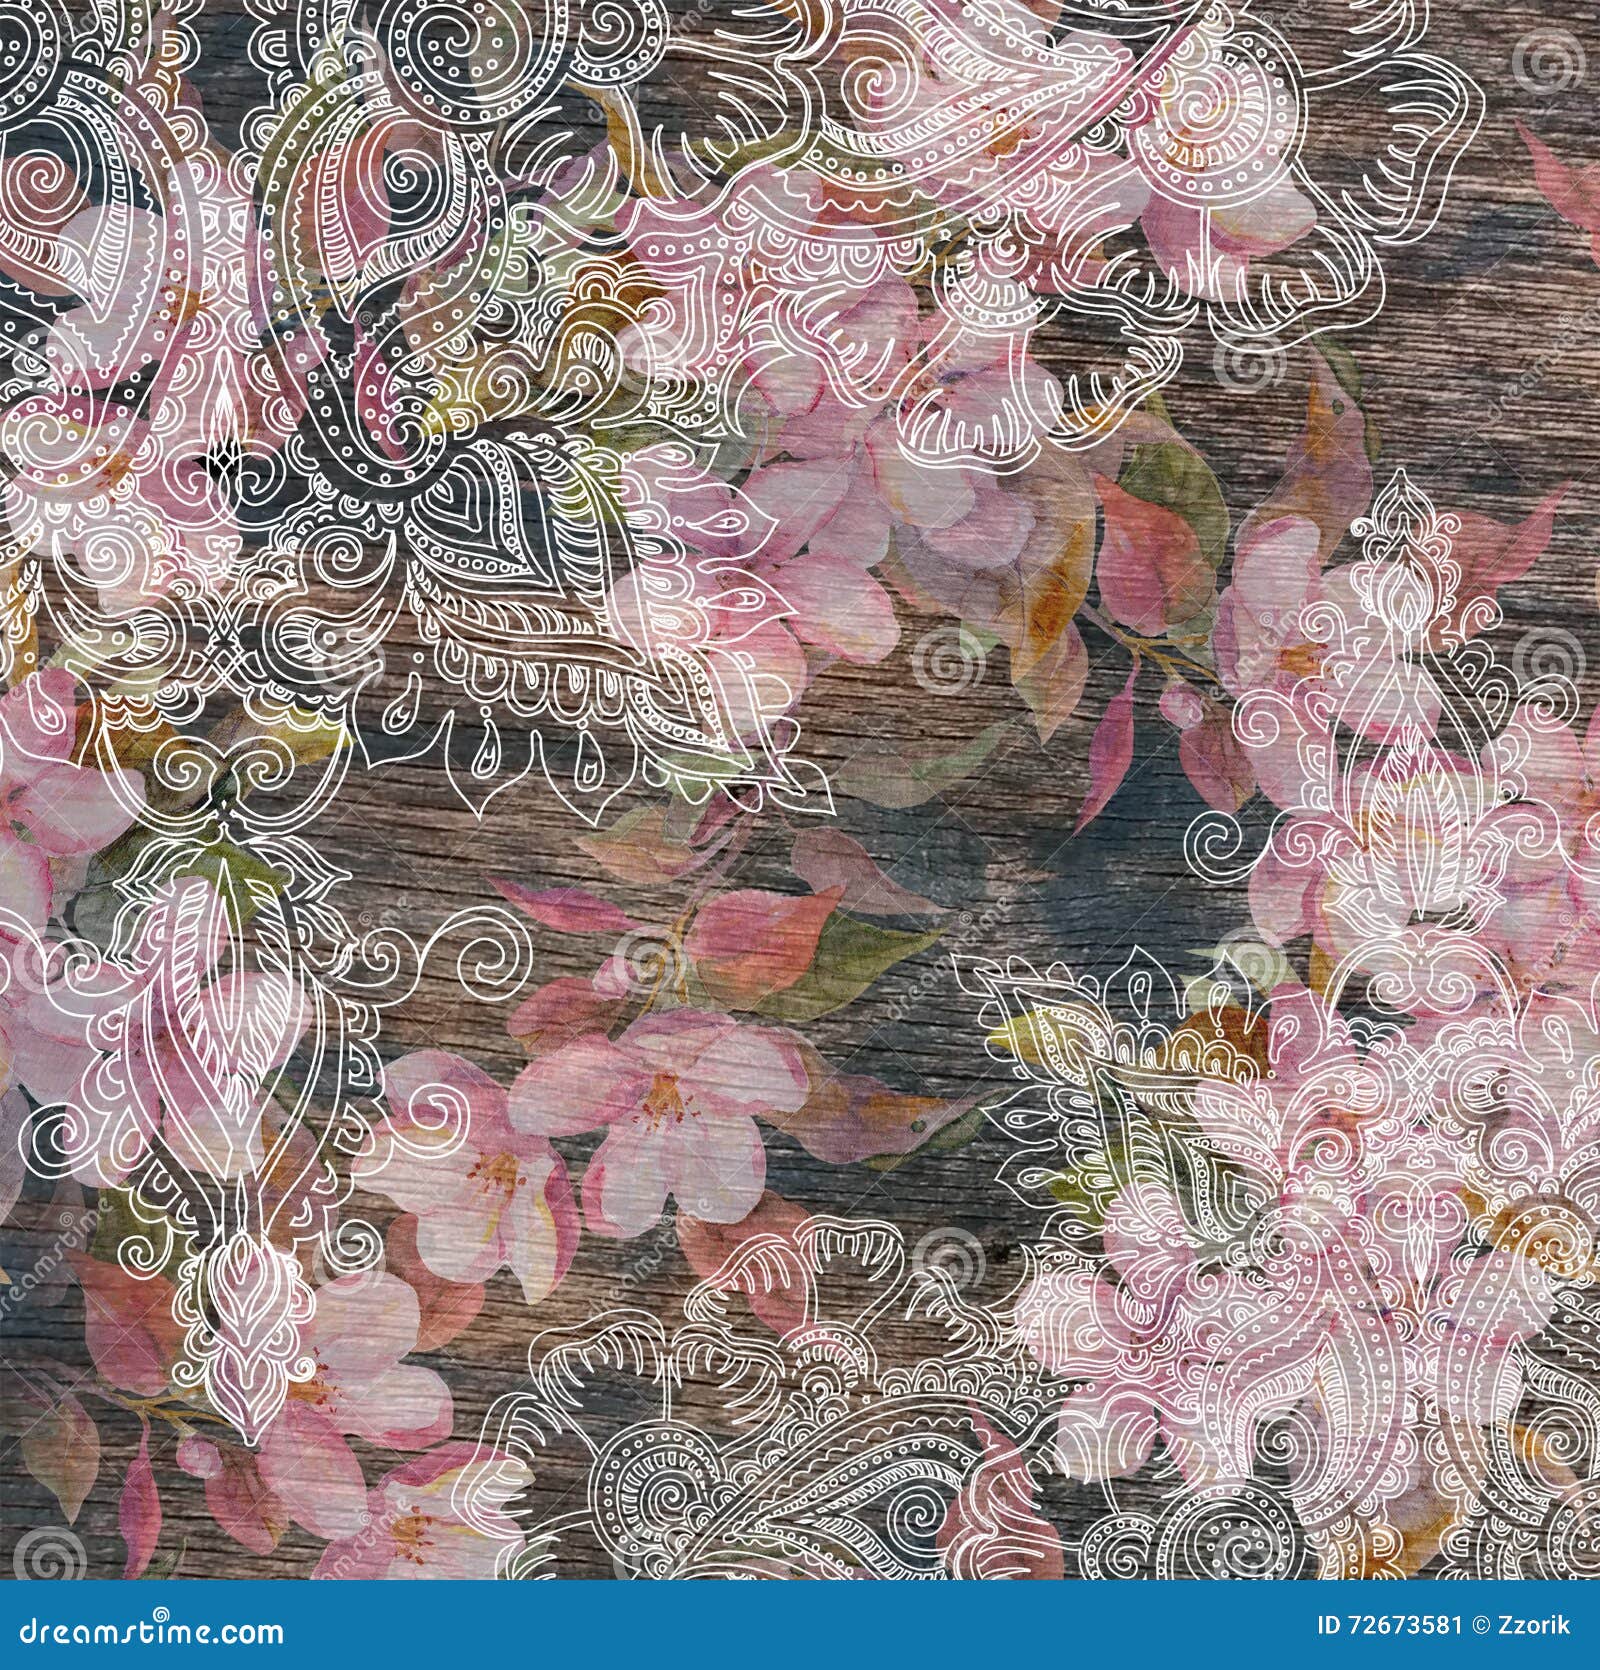 floral pattern - pink flowers, eastern ethnic , wood texture